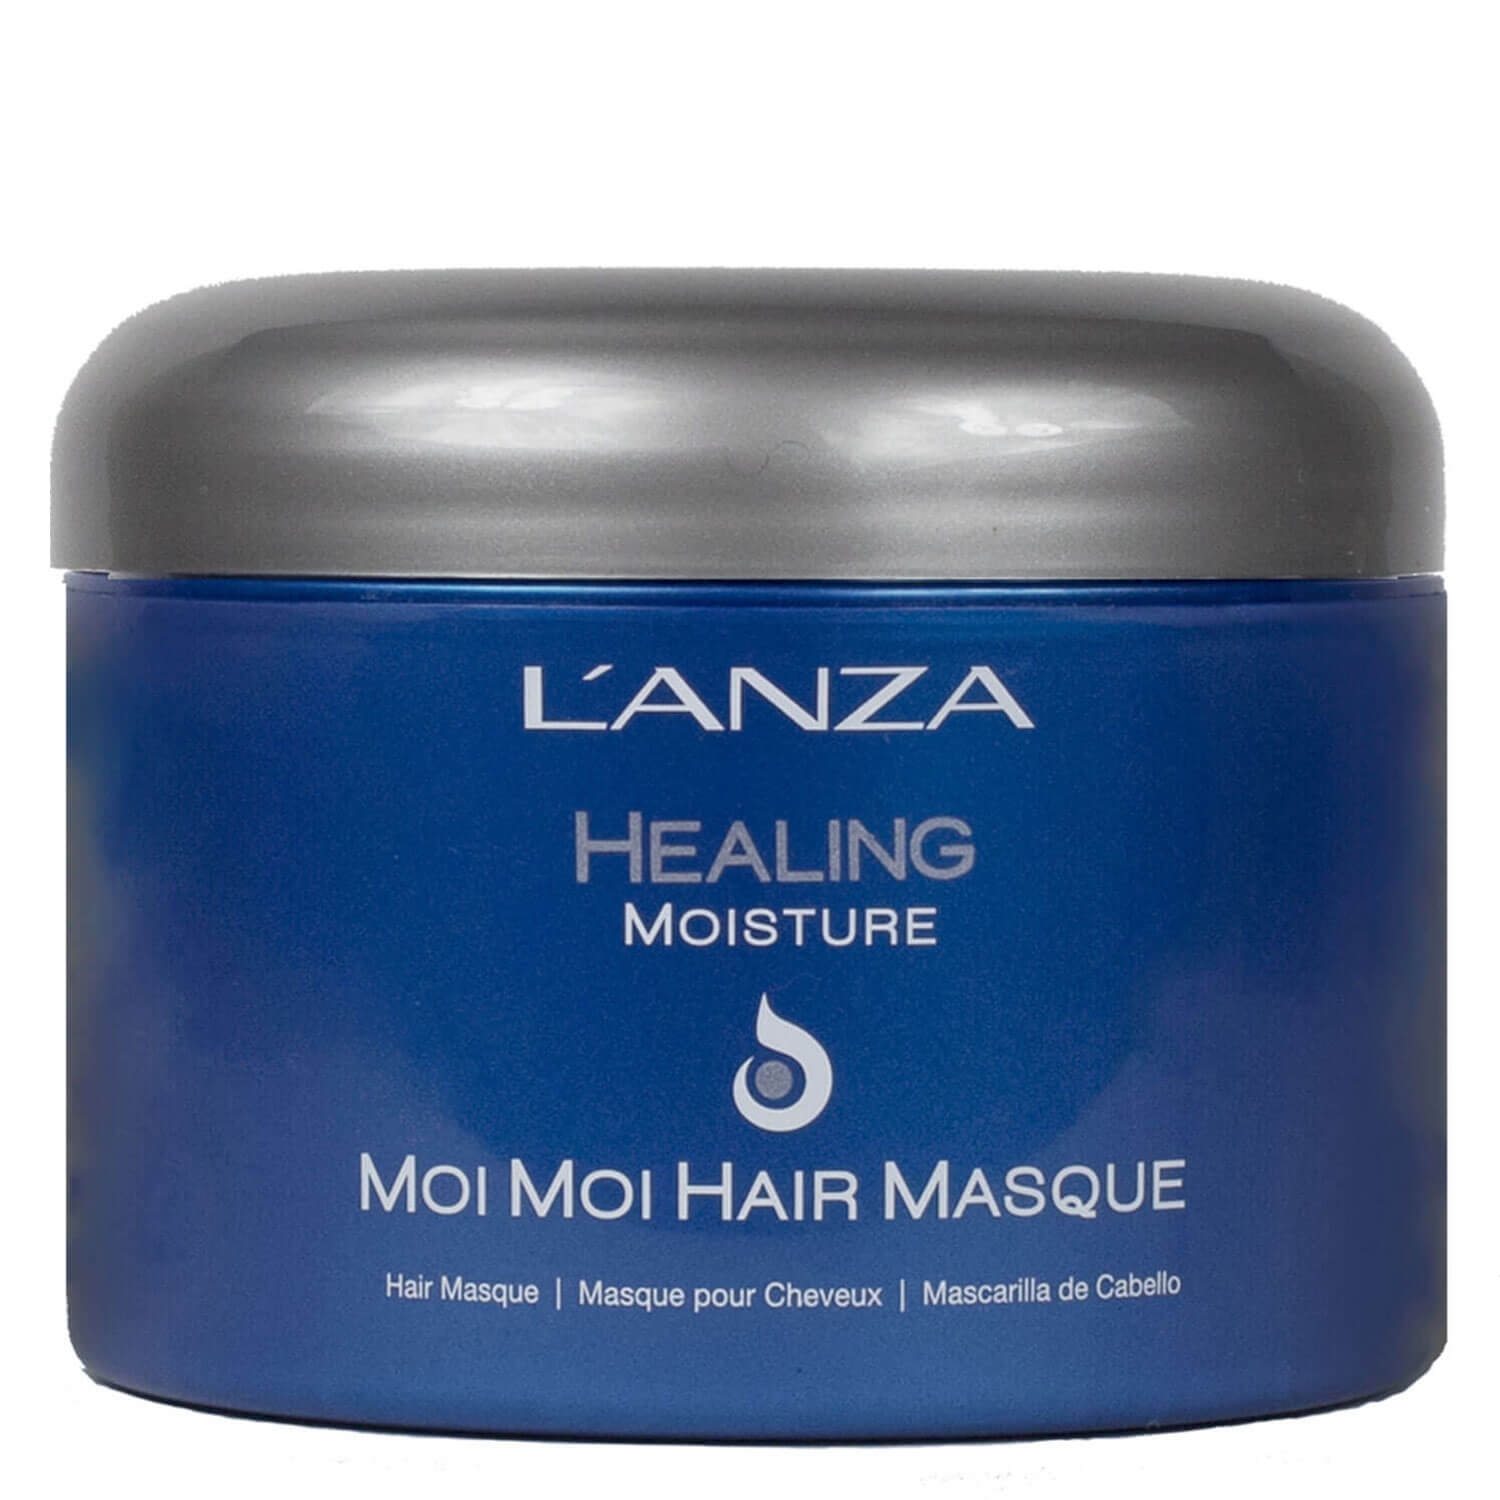 Product image from Healing Moisture - Moi Moi Hair Masque